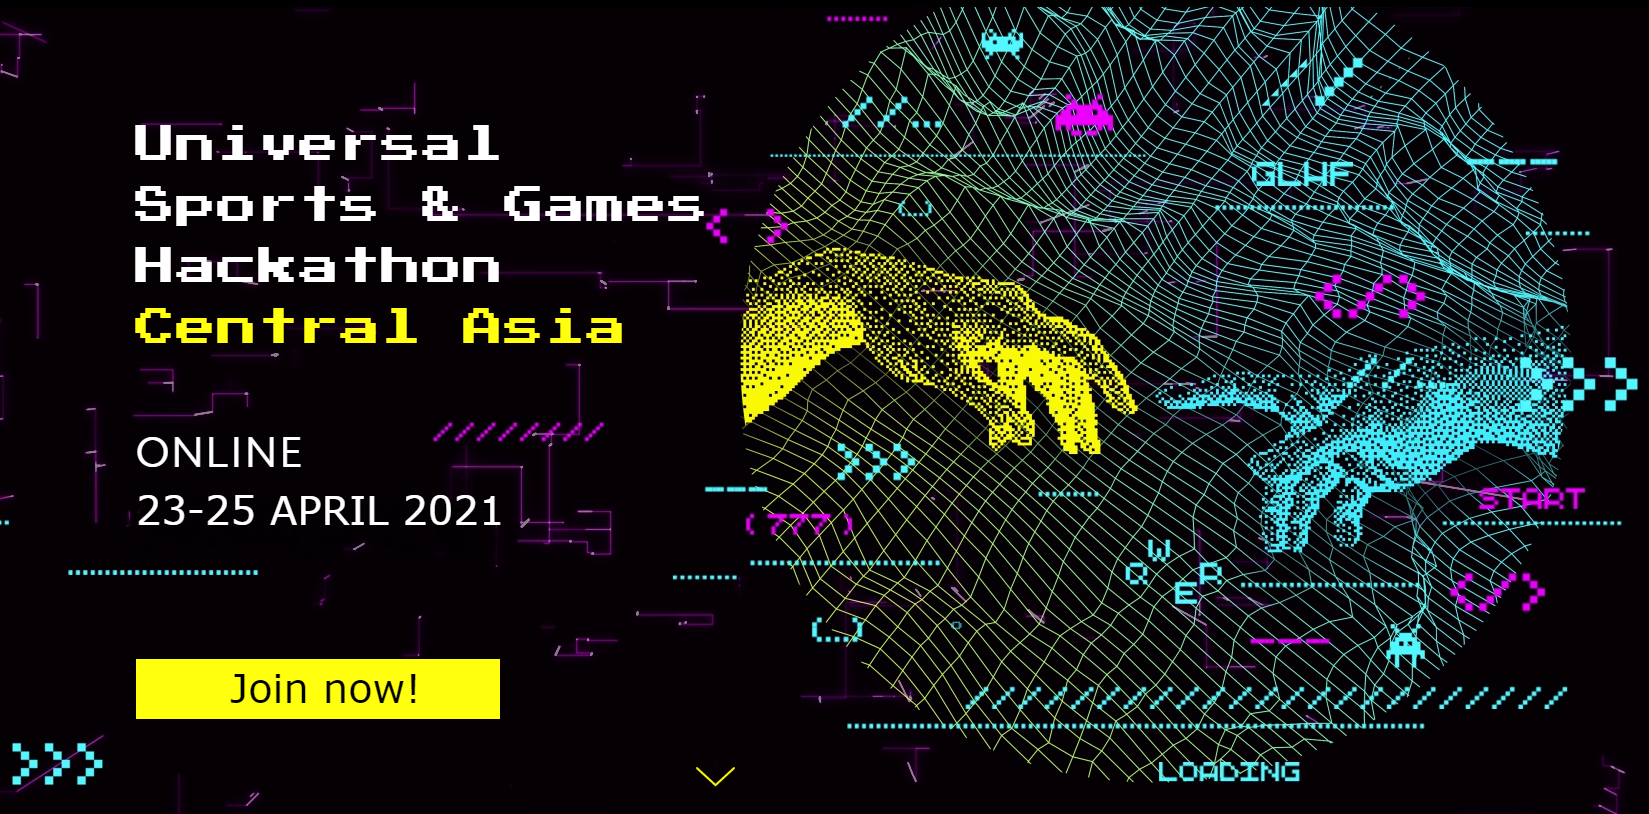 Universal Sports & Games Hackathon Central Asia